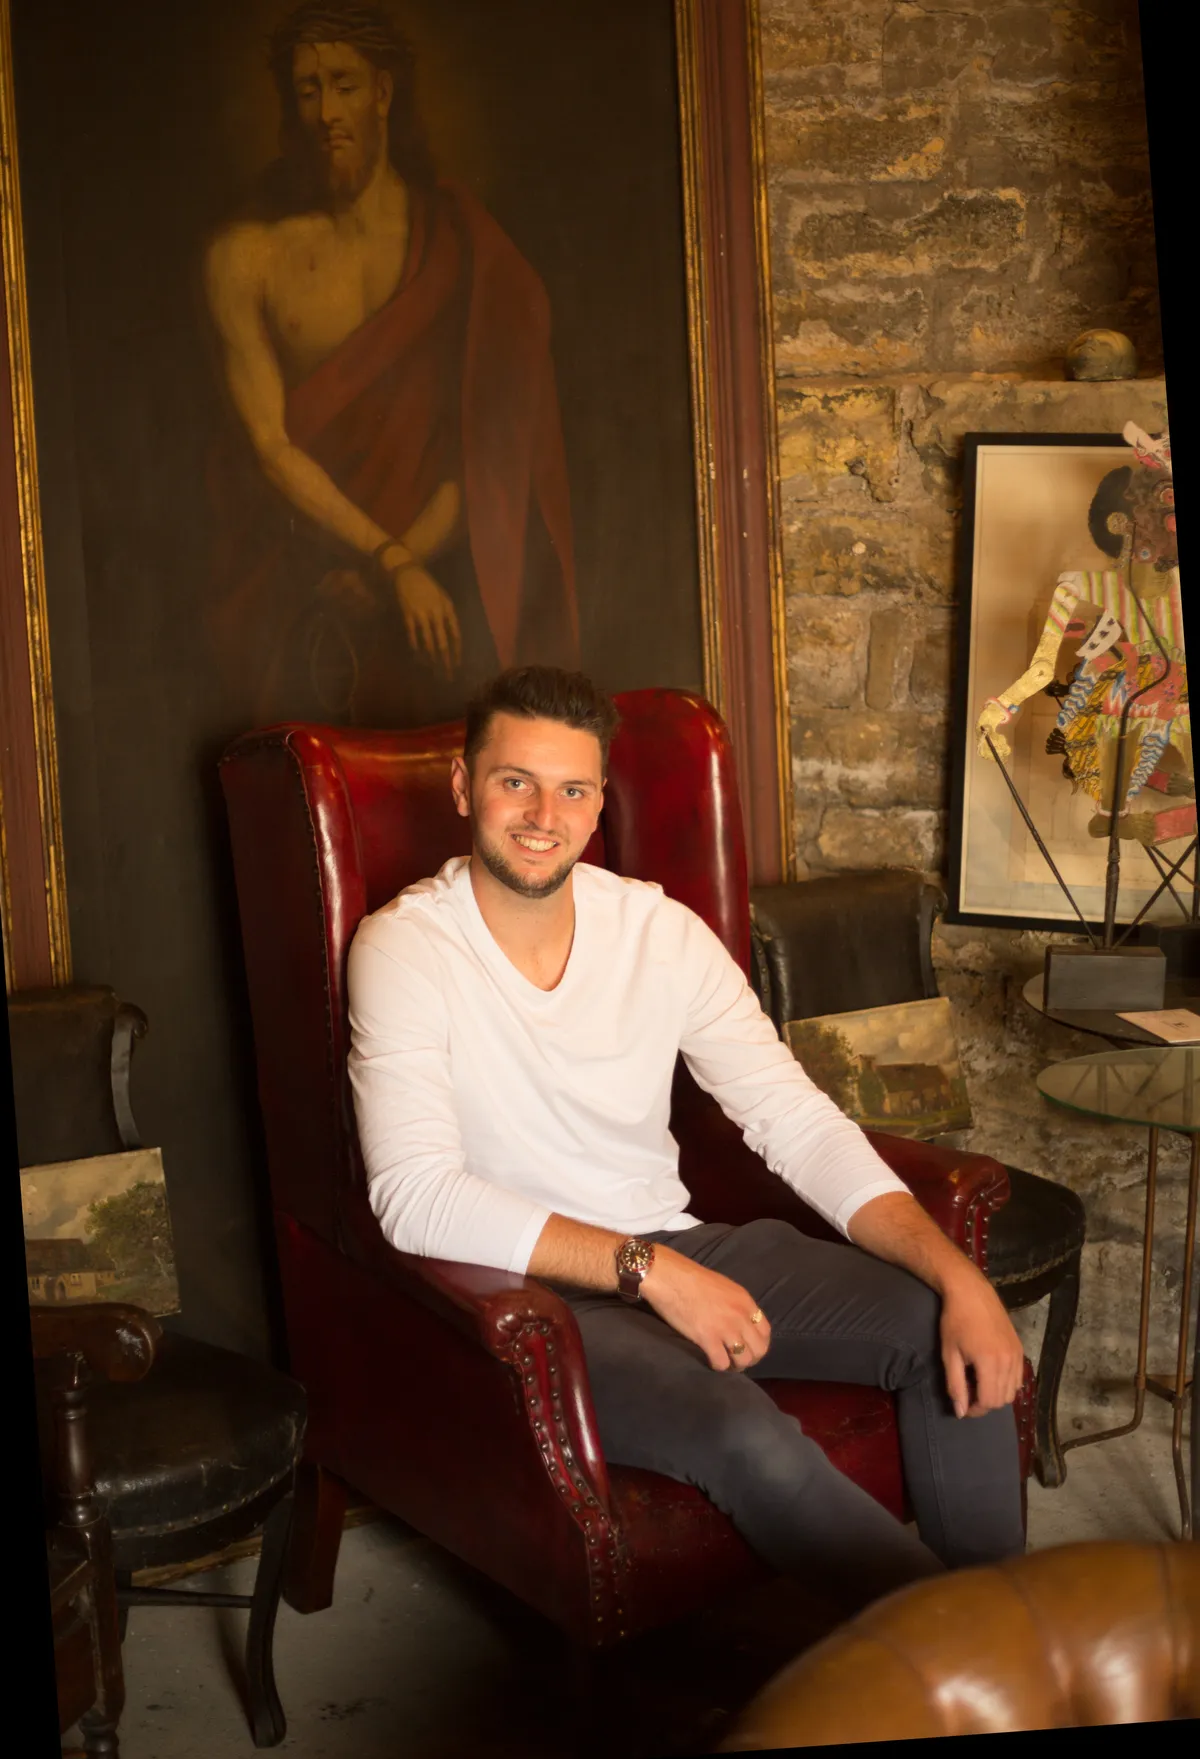 Antiques dealer Matt Dixon sat in a red leather armchair in his shop